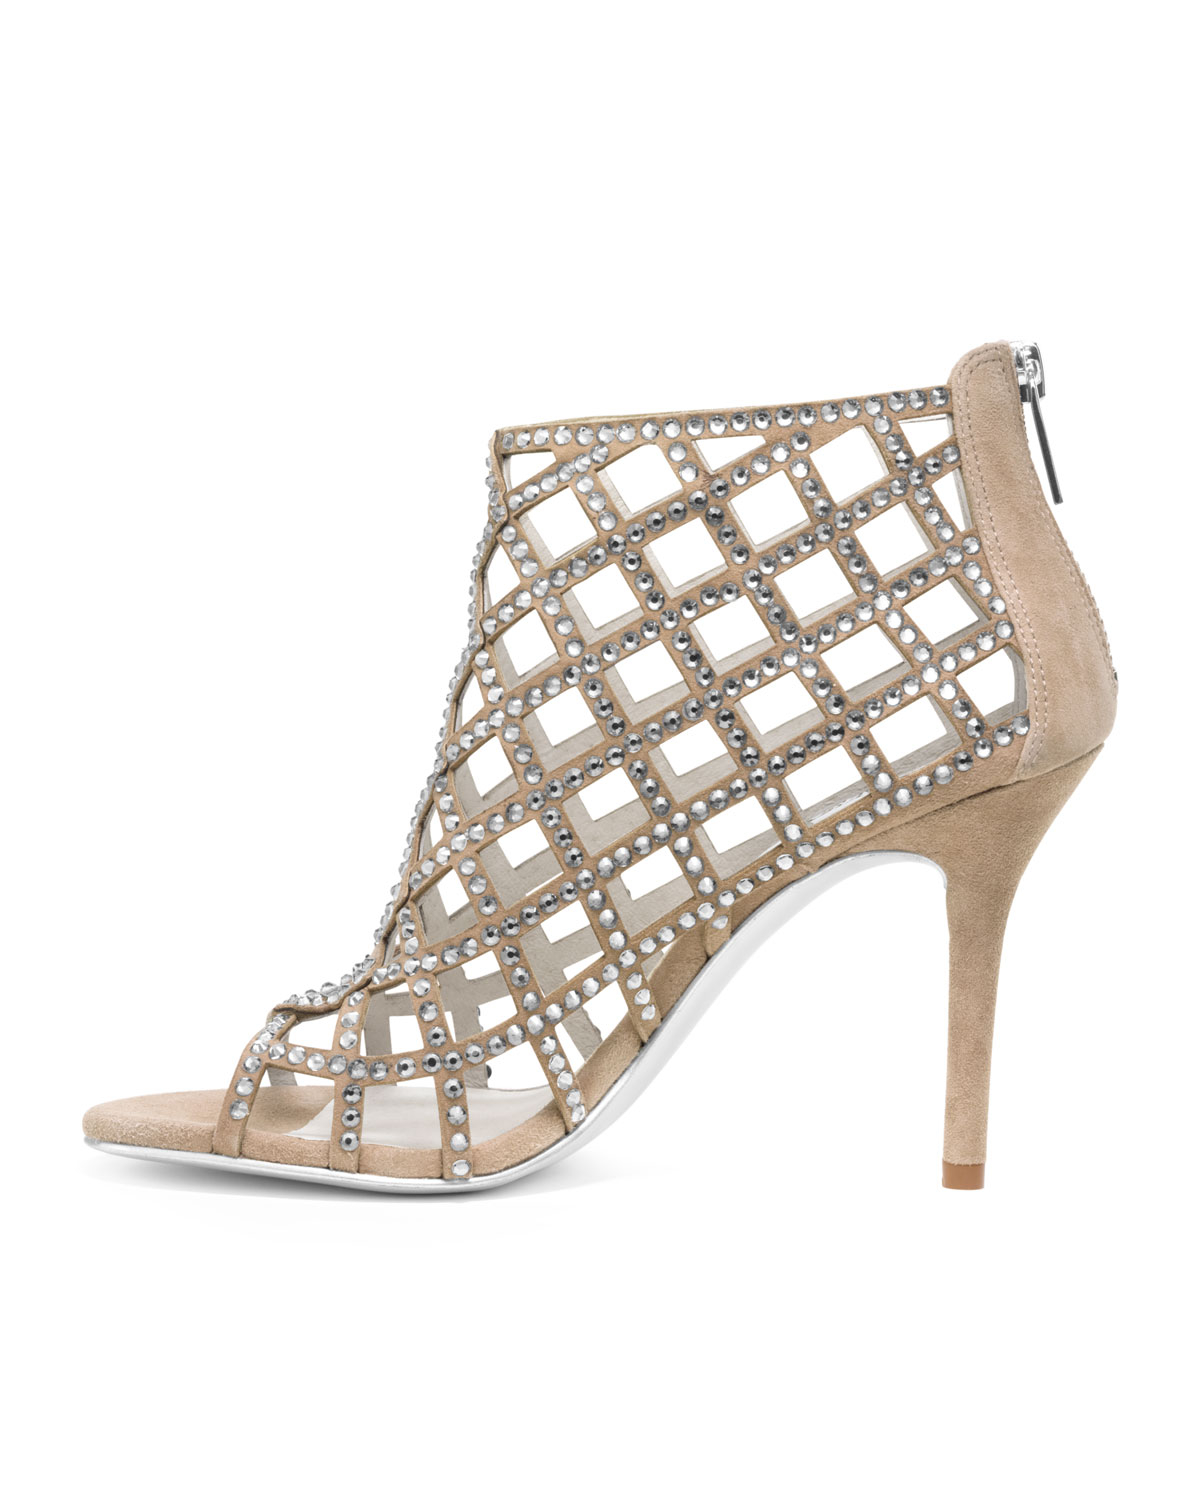 Michael Kors Yvonne Crystallized Cage Bootie in Khaki 